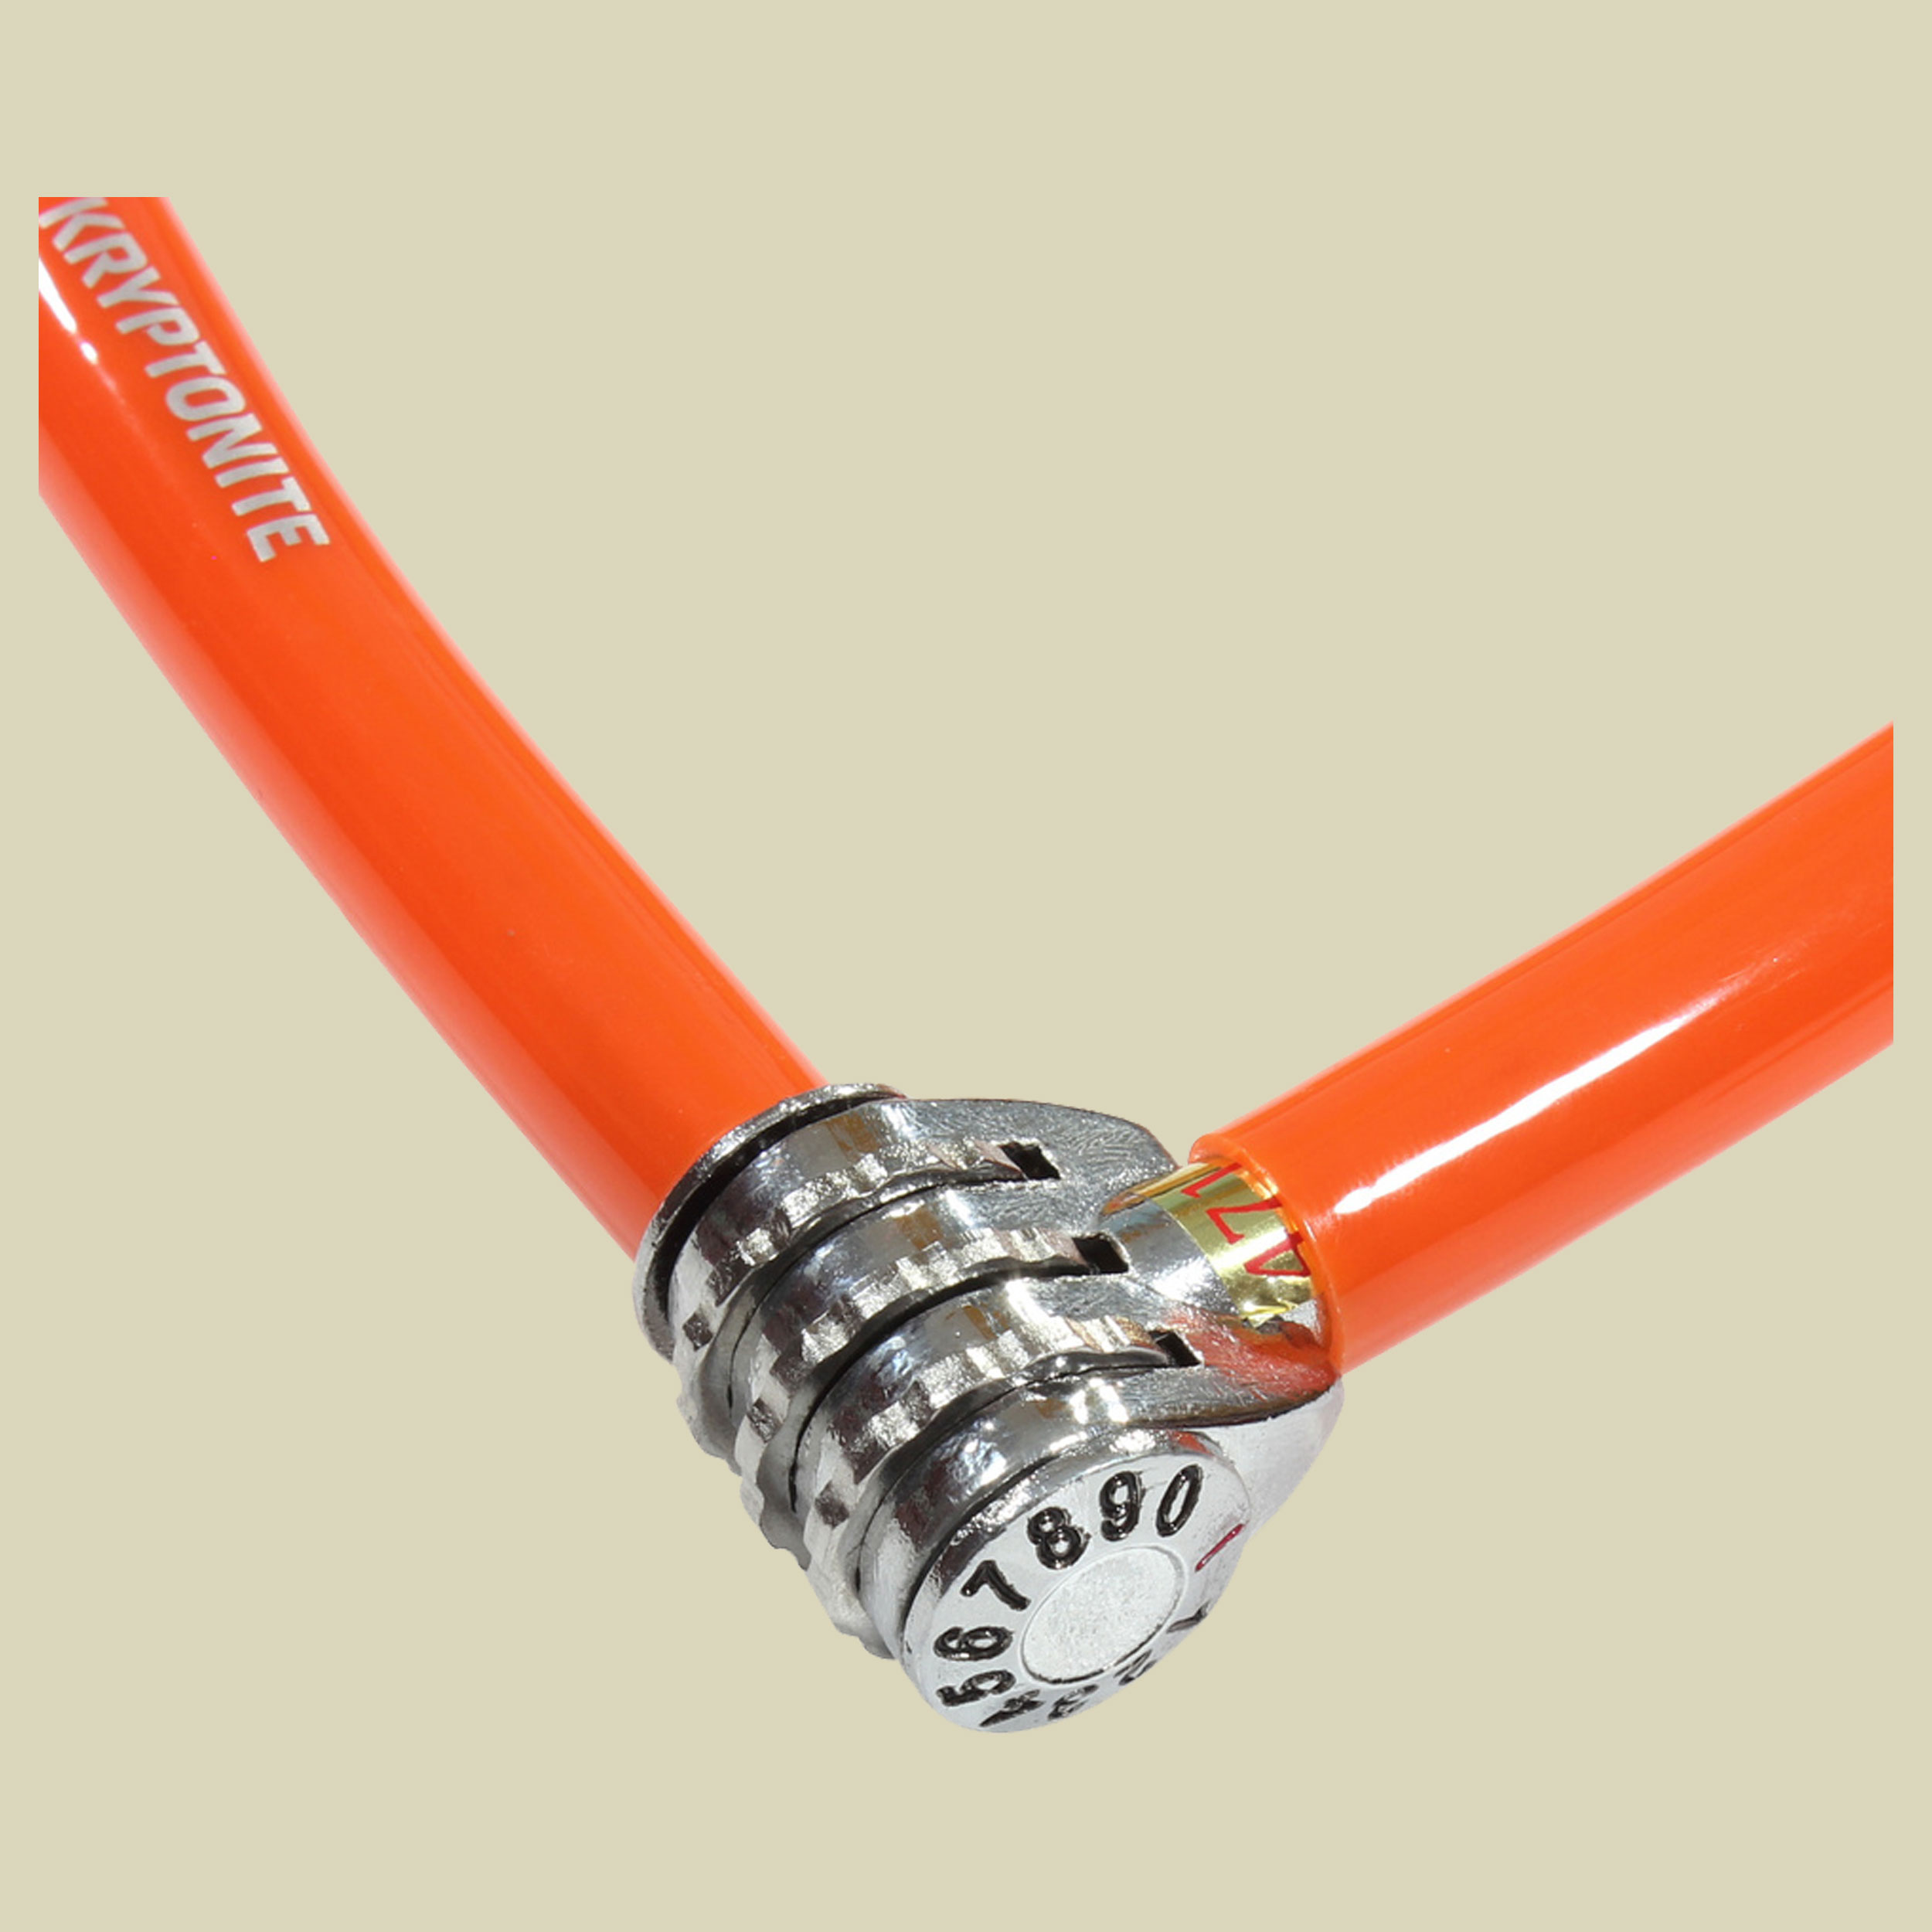 Keeper 665 Combo Cable Größe one size Farbe orange